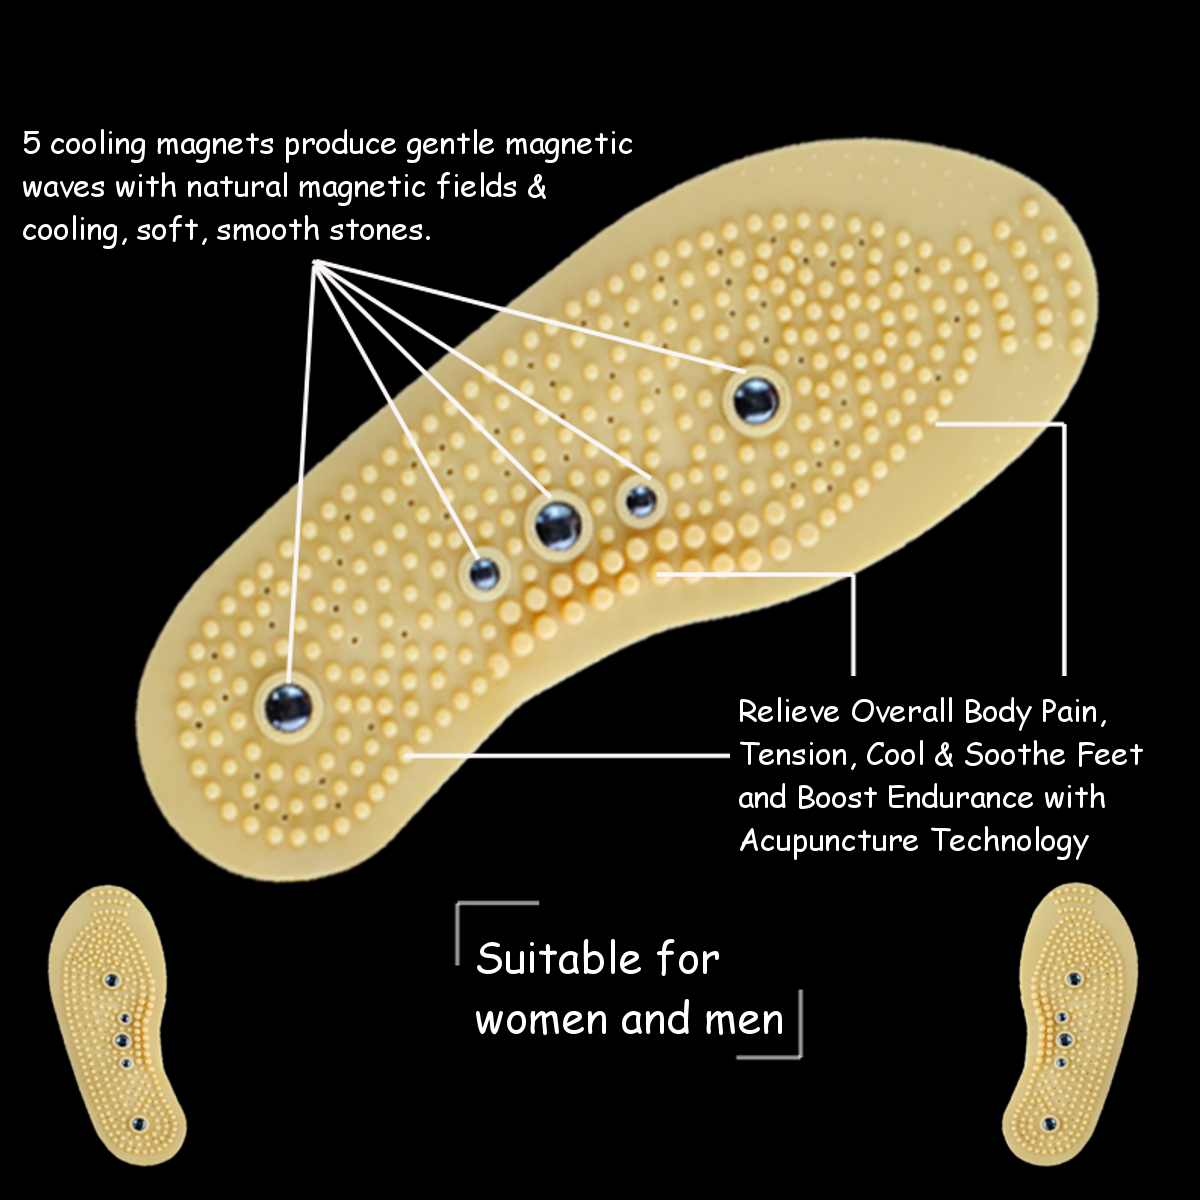 Acupressure-Magnetic-Massage-Insoles-Foot-Therapy-Reflexology-Pain-Relief-Shoe-Insole-1399043